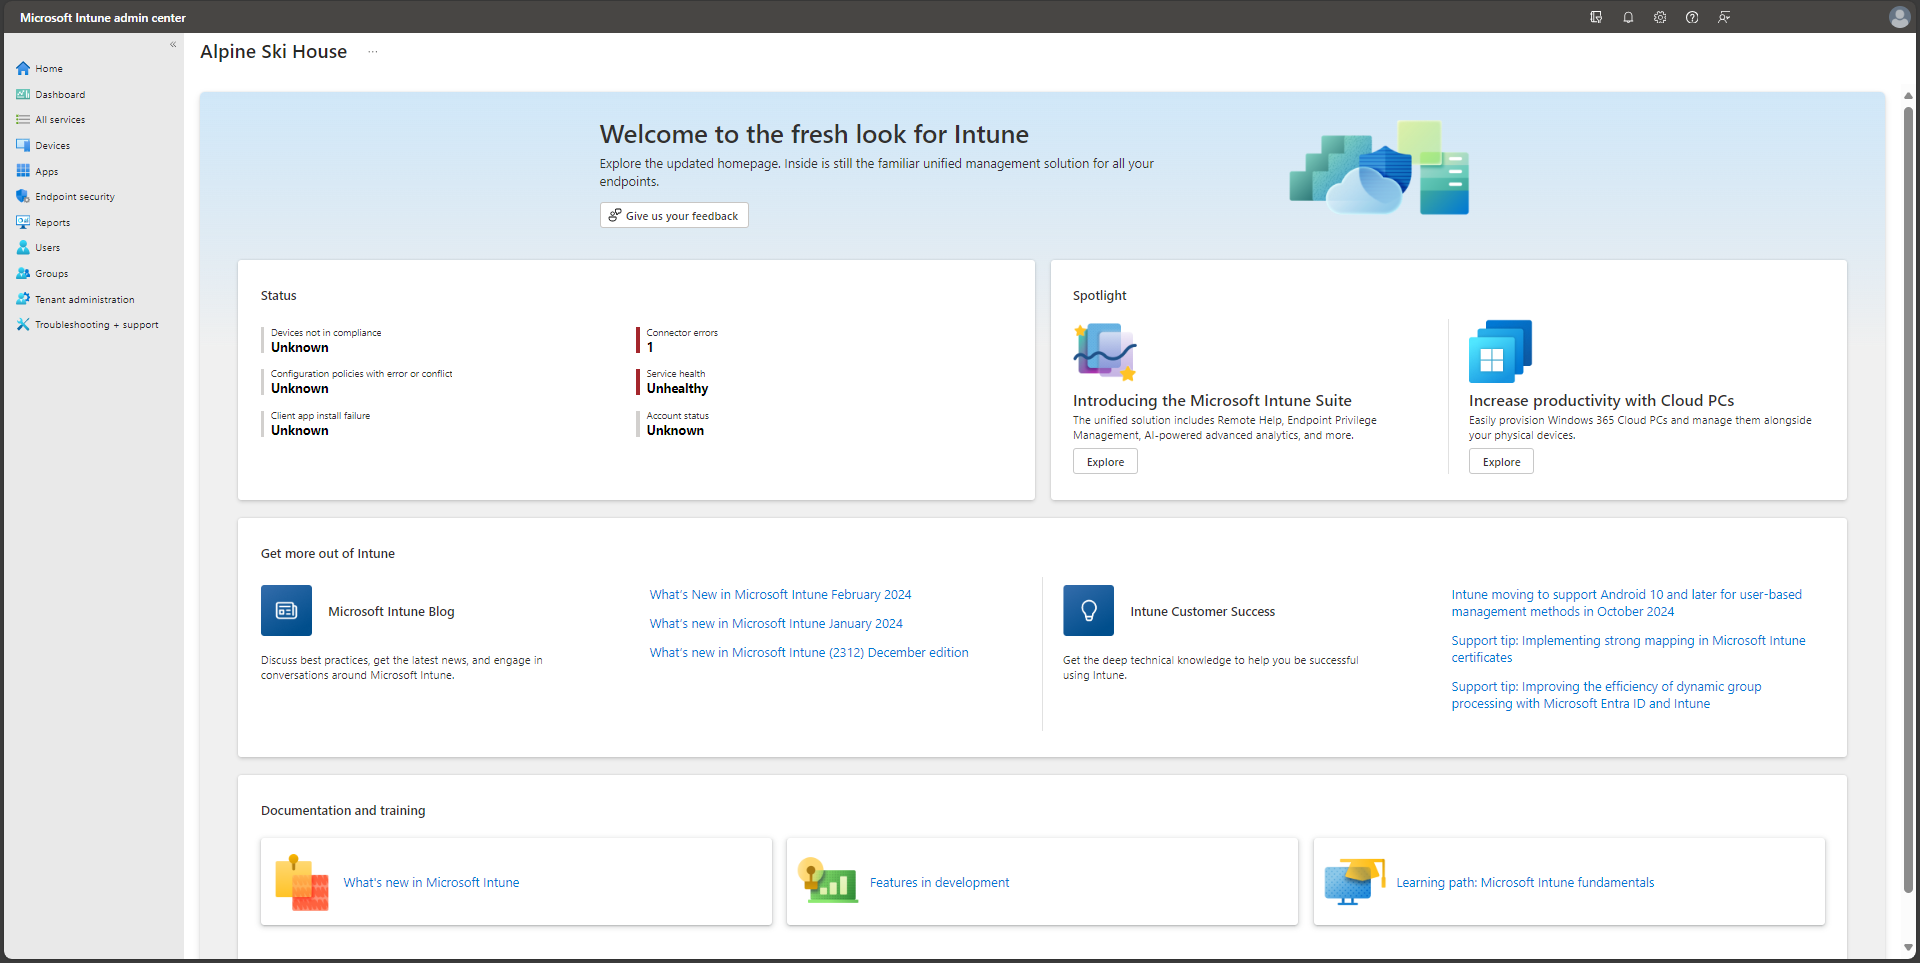 Screenshot of the Microsoft Intune admin center - Home page.